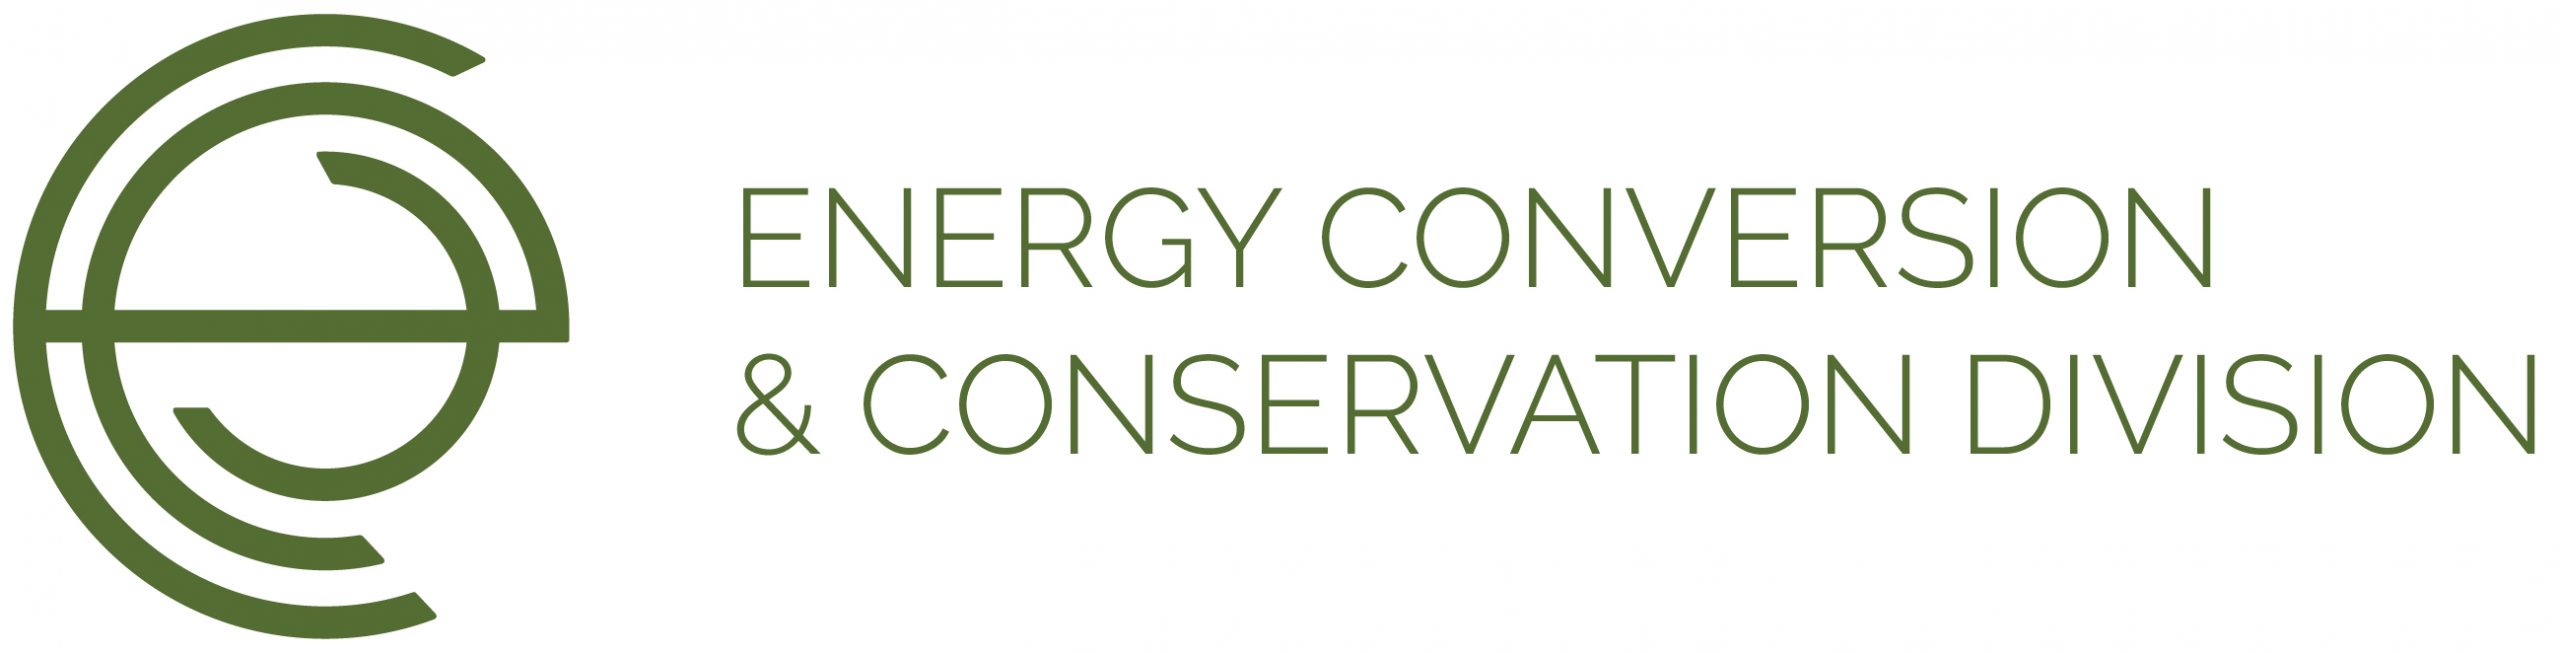 ASEE Energy Conversion, Conservation & Nuclear Engineering Division